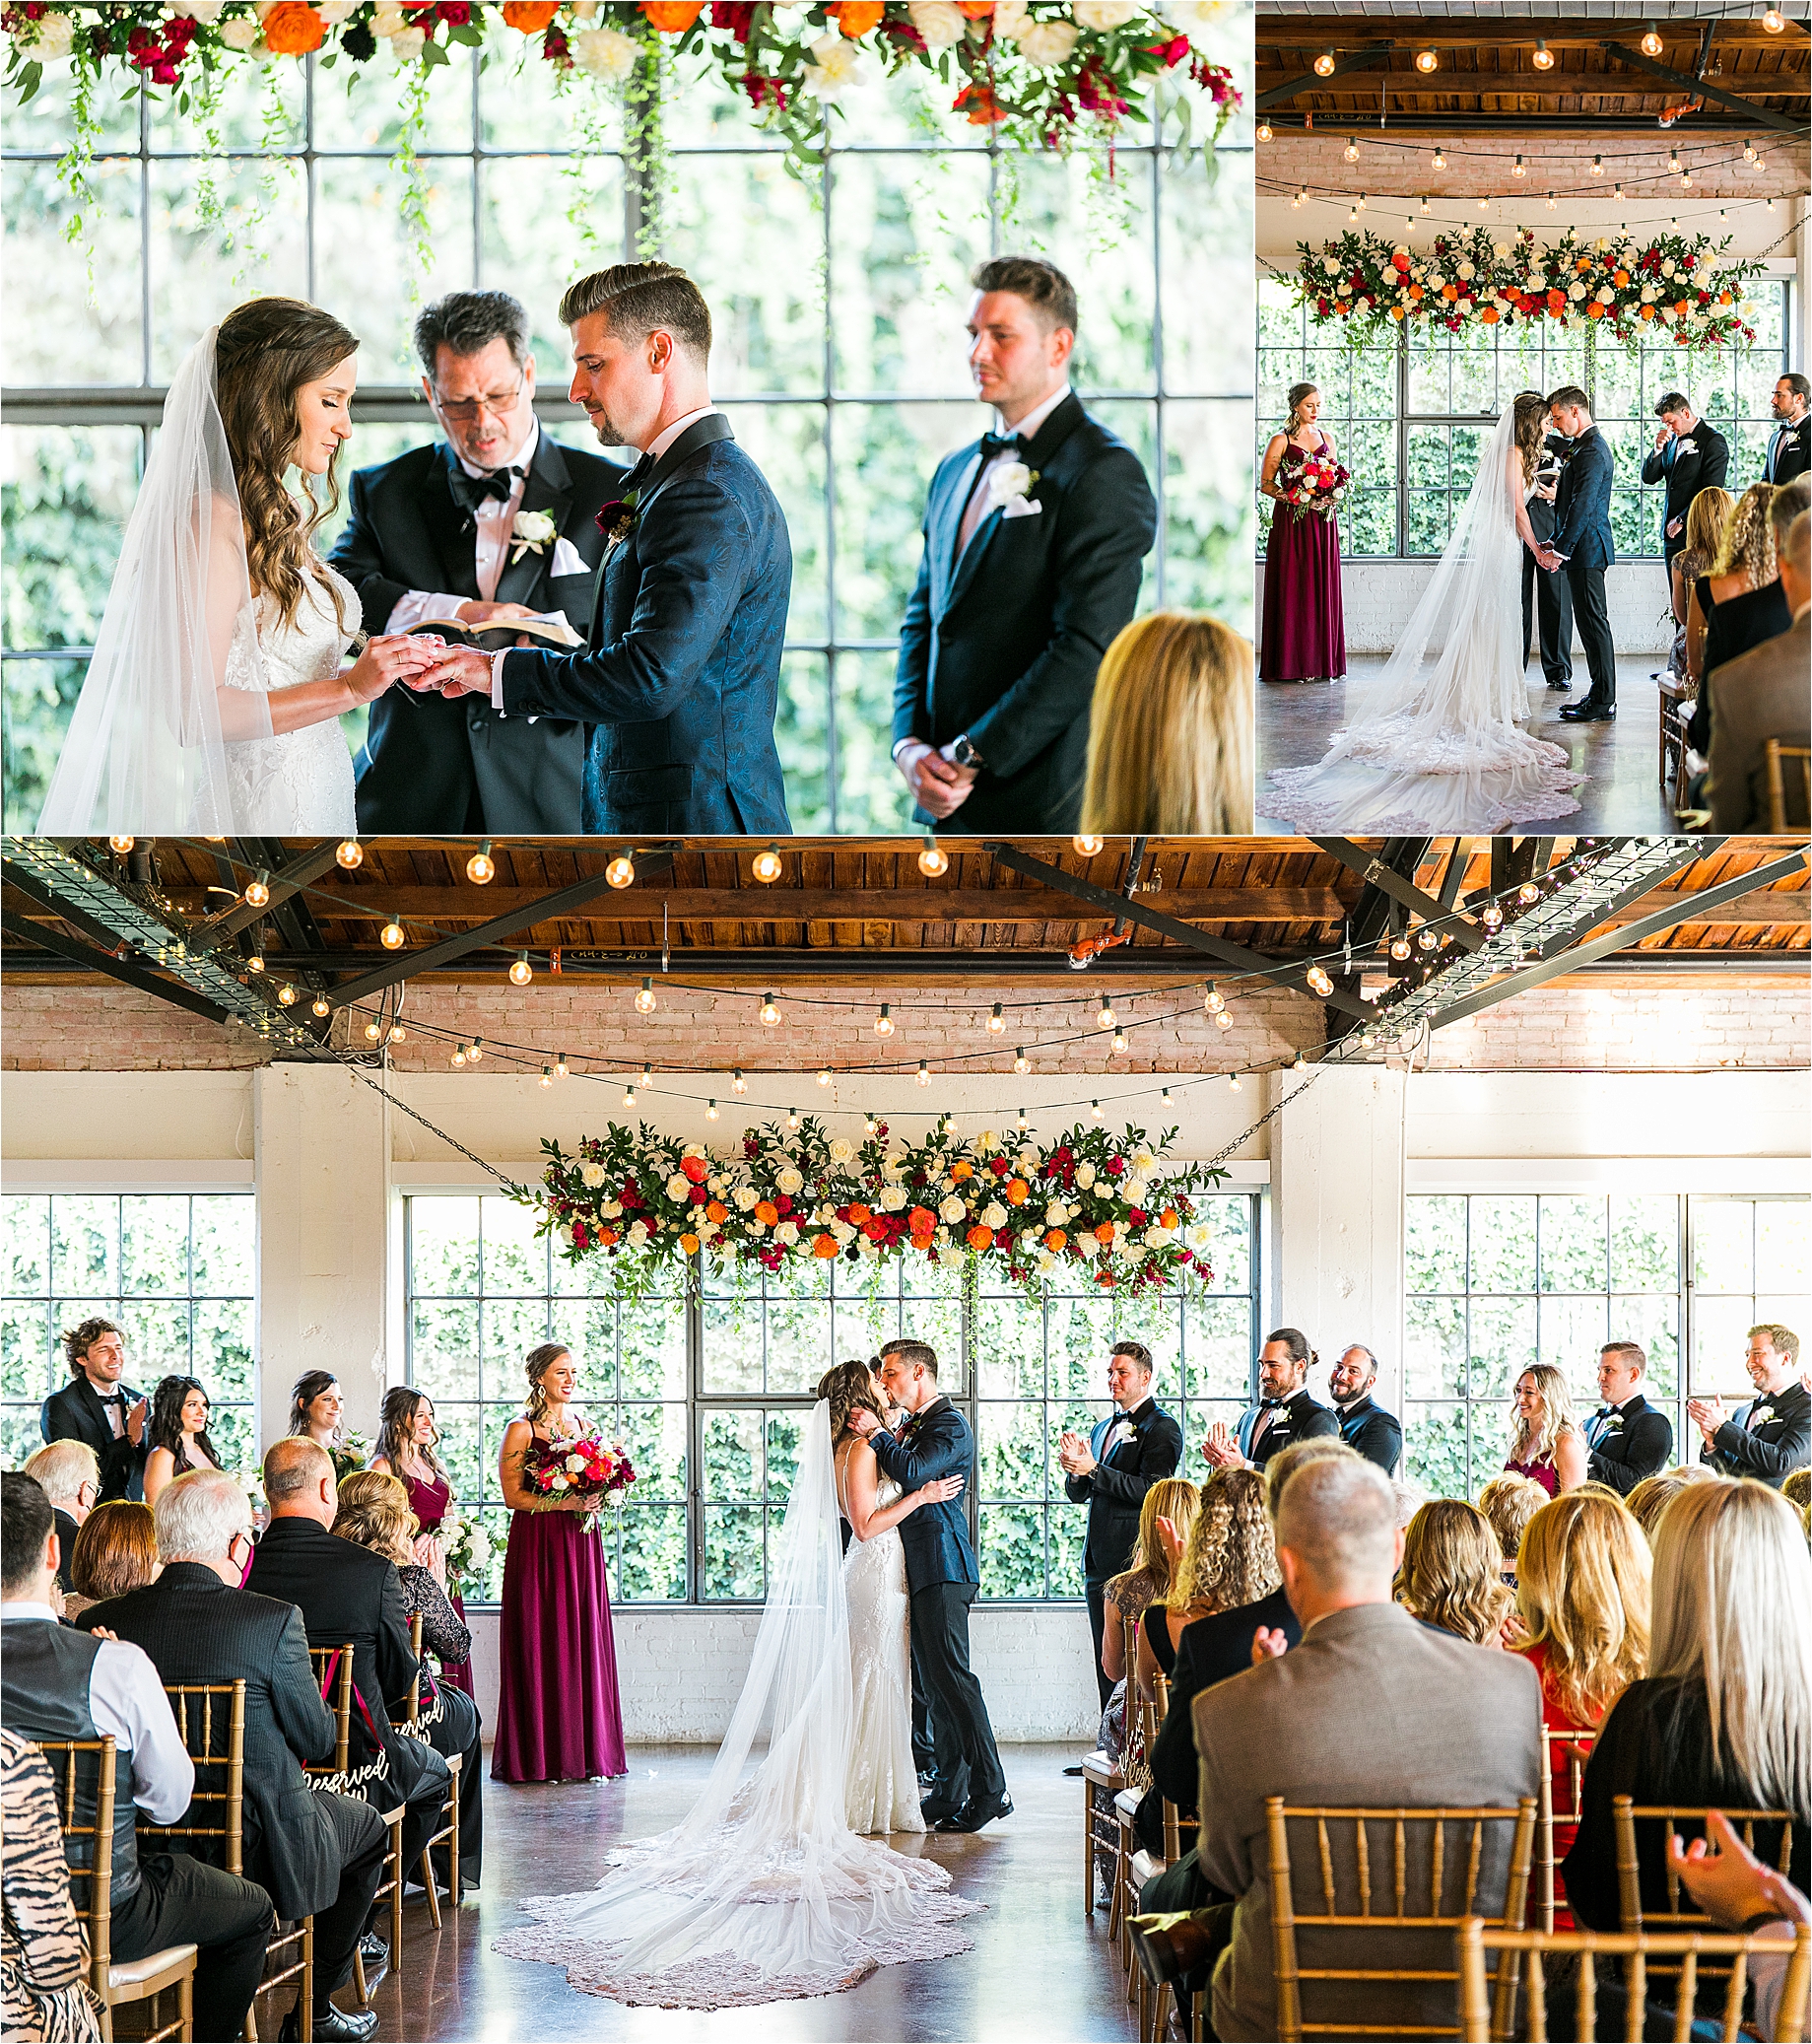 A bride puts on her groom's wedding band as they say their wedding vows and they share their first kiss as husband and wife at an industrial wedding venue, Hickory Street Annex, in Dallas Texas